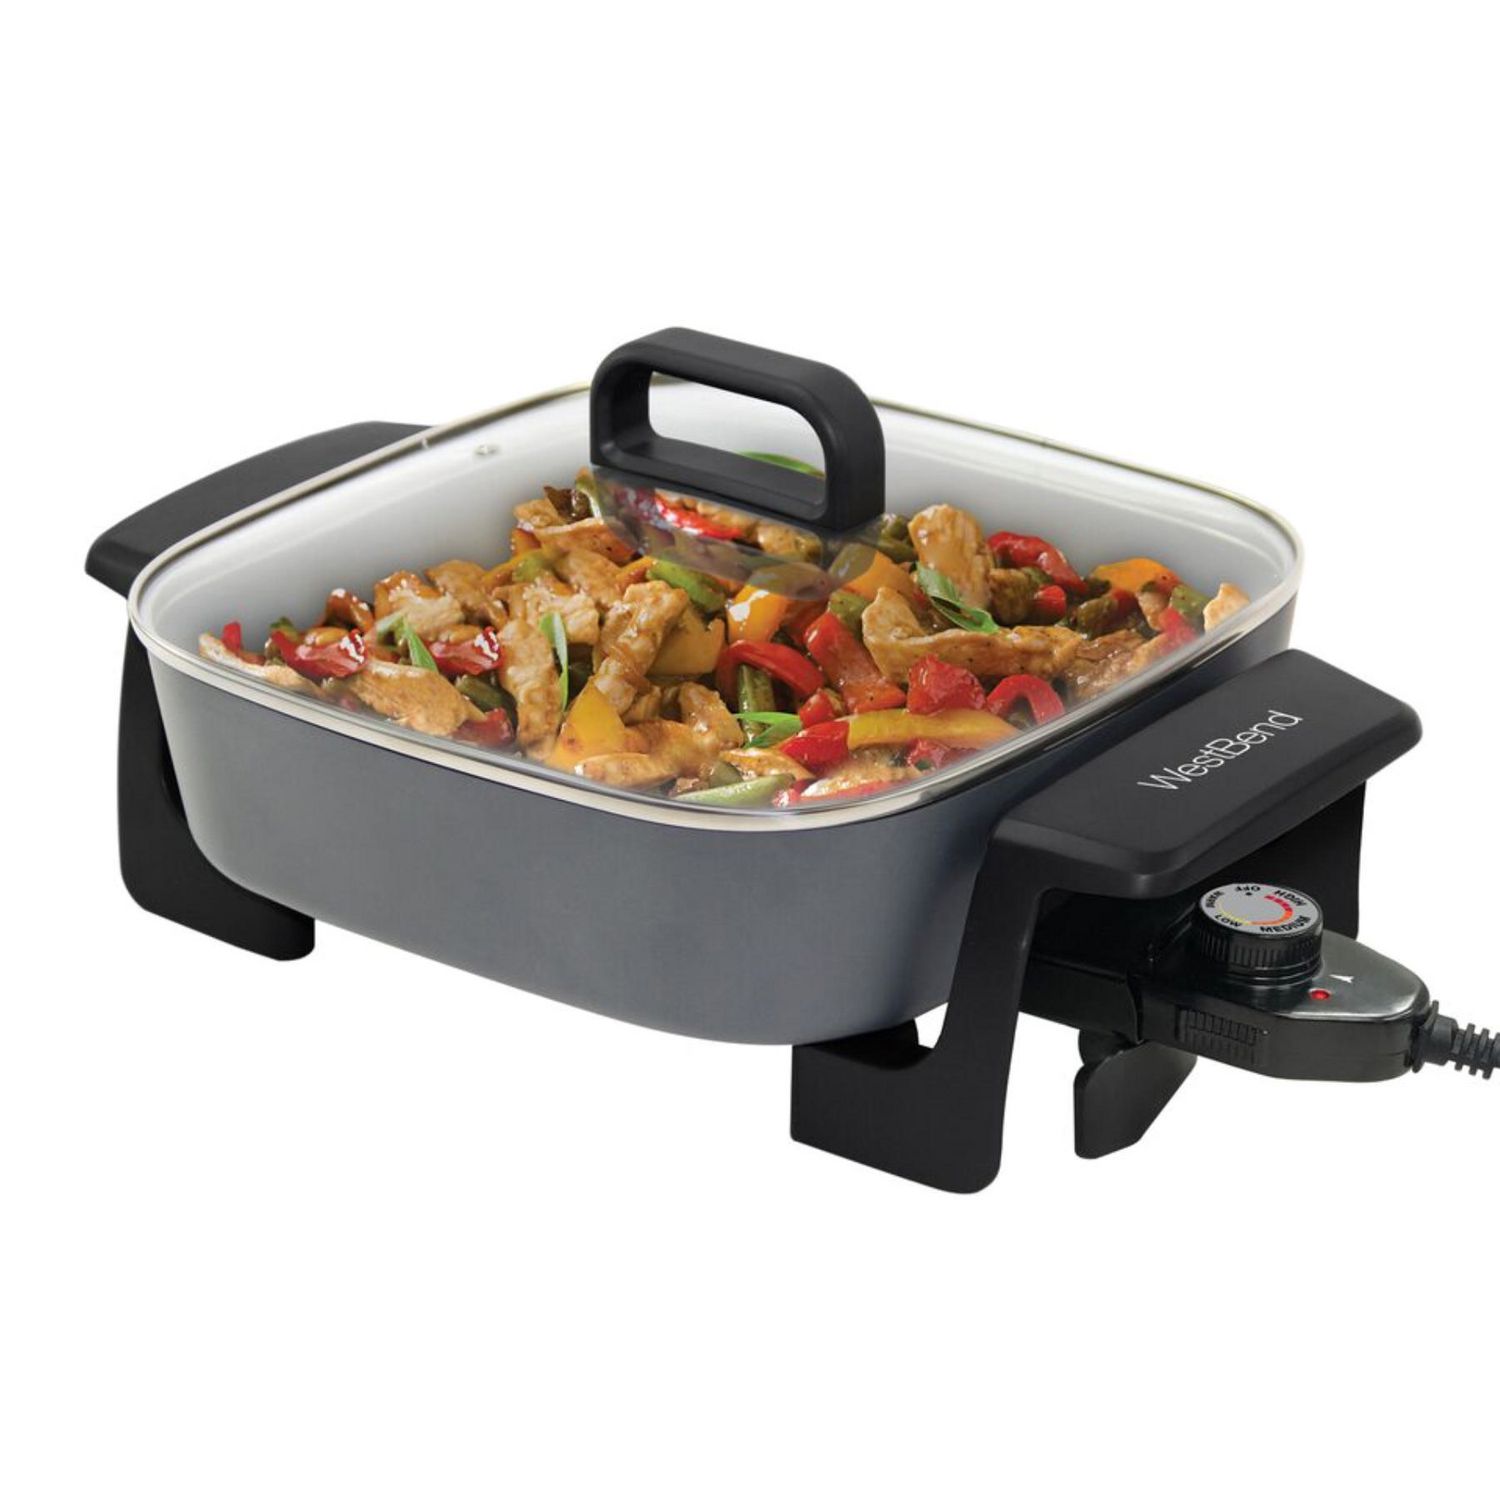 West Bend 72216 ExtraDeep Square Electric Skillet